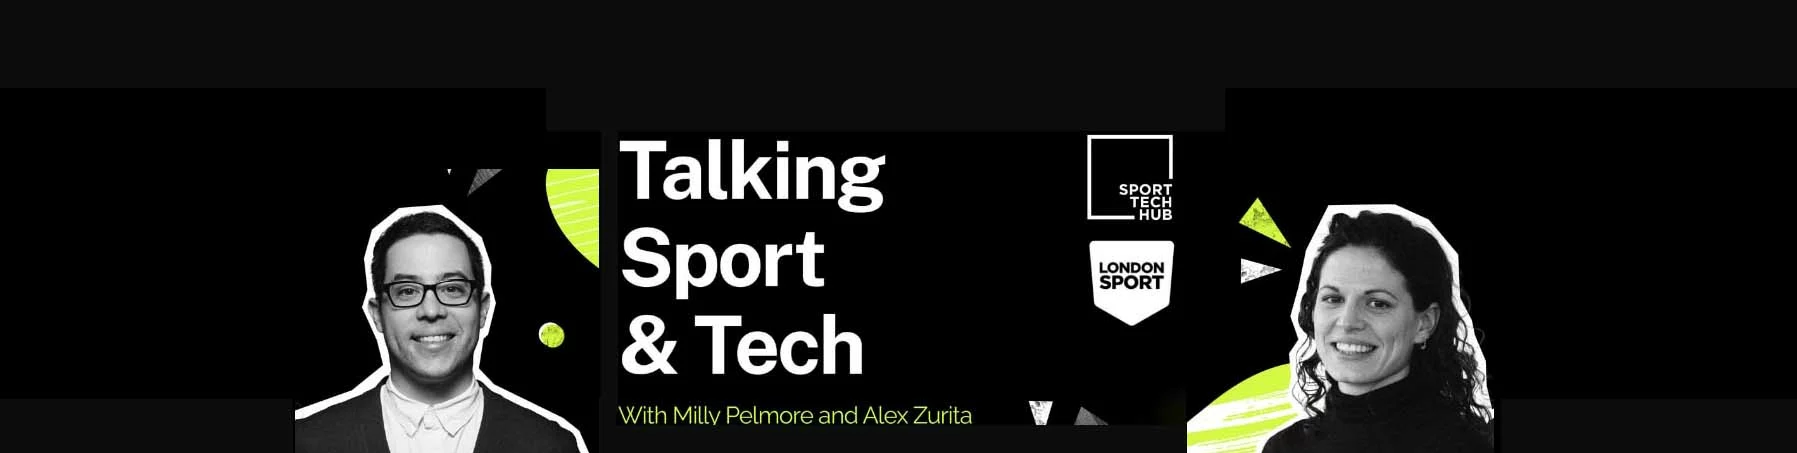 Talking sport and tech podcast 1 e1652866206119